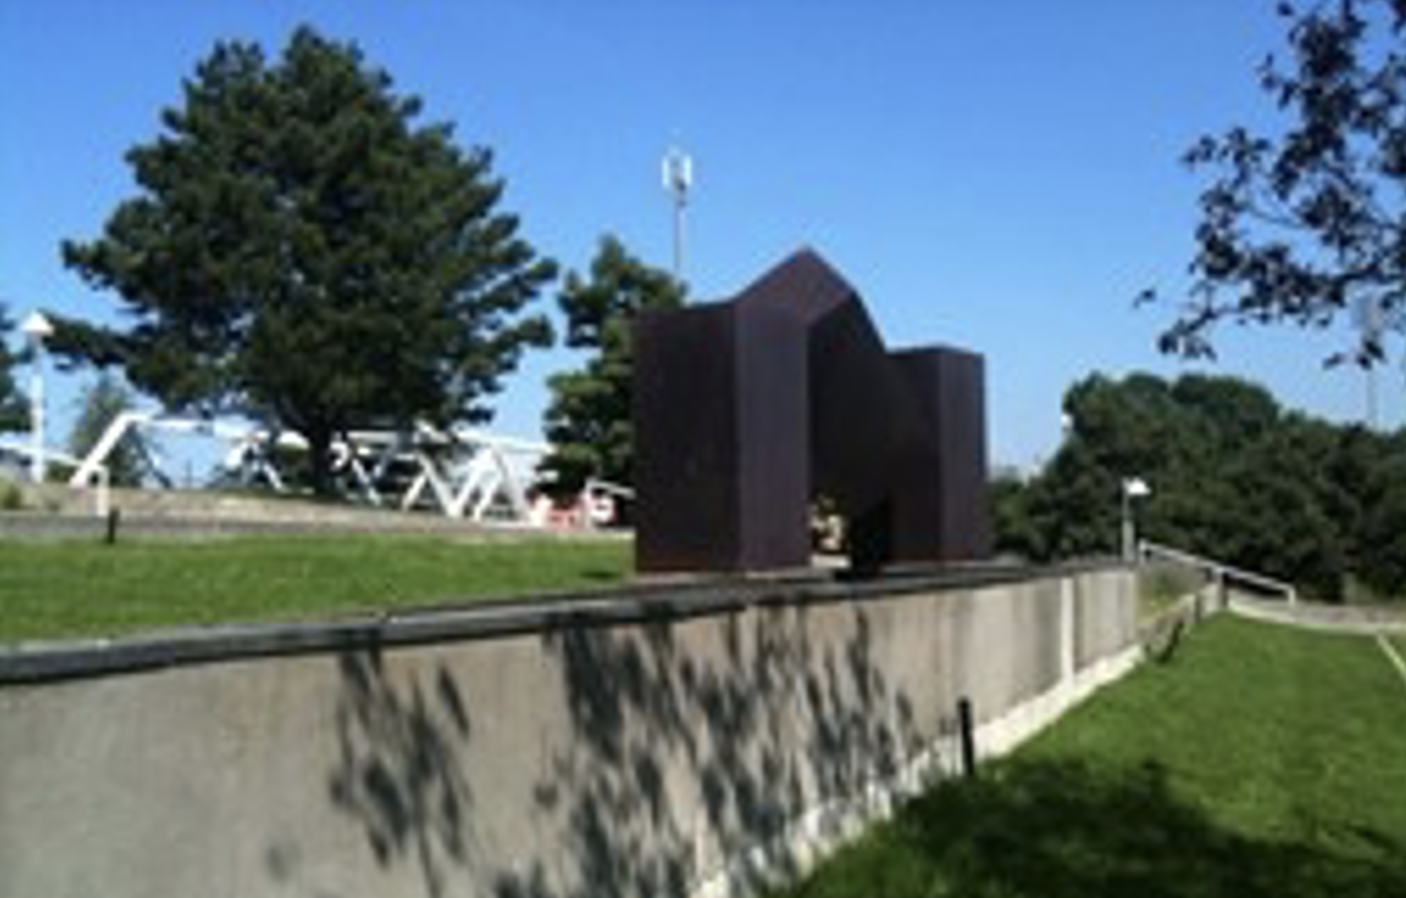 Image of an all-black artwork piece on a grassy area above a short concrete wall 

